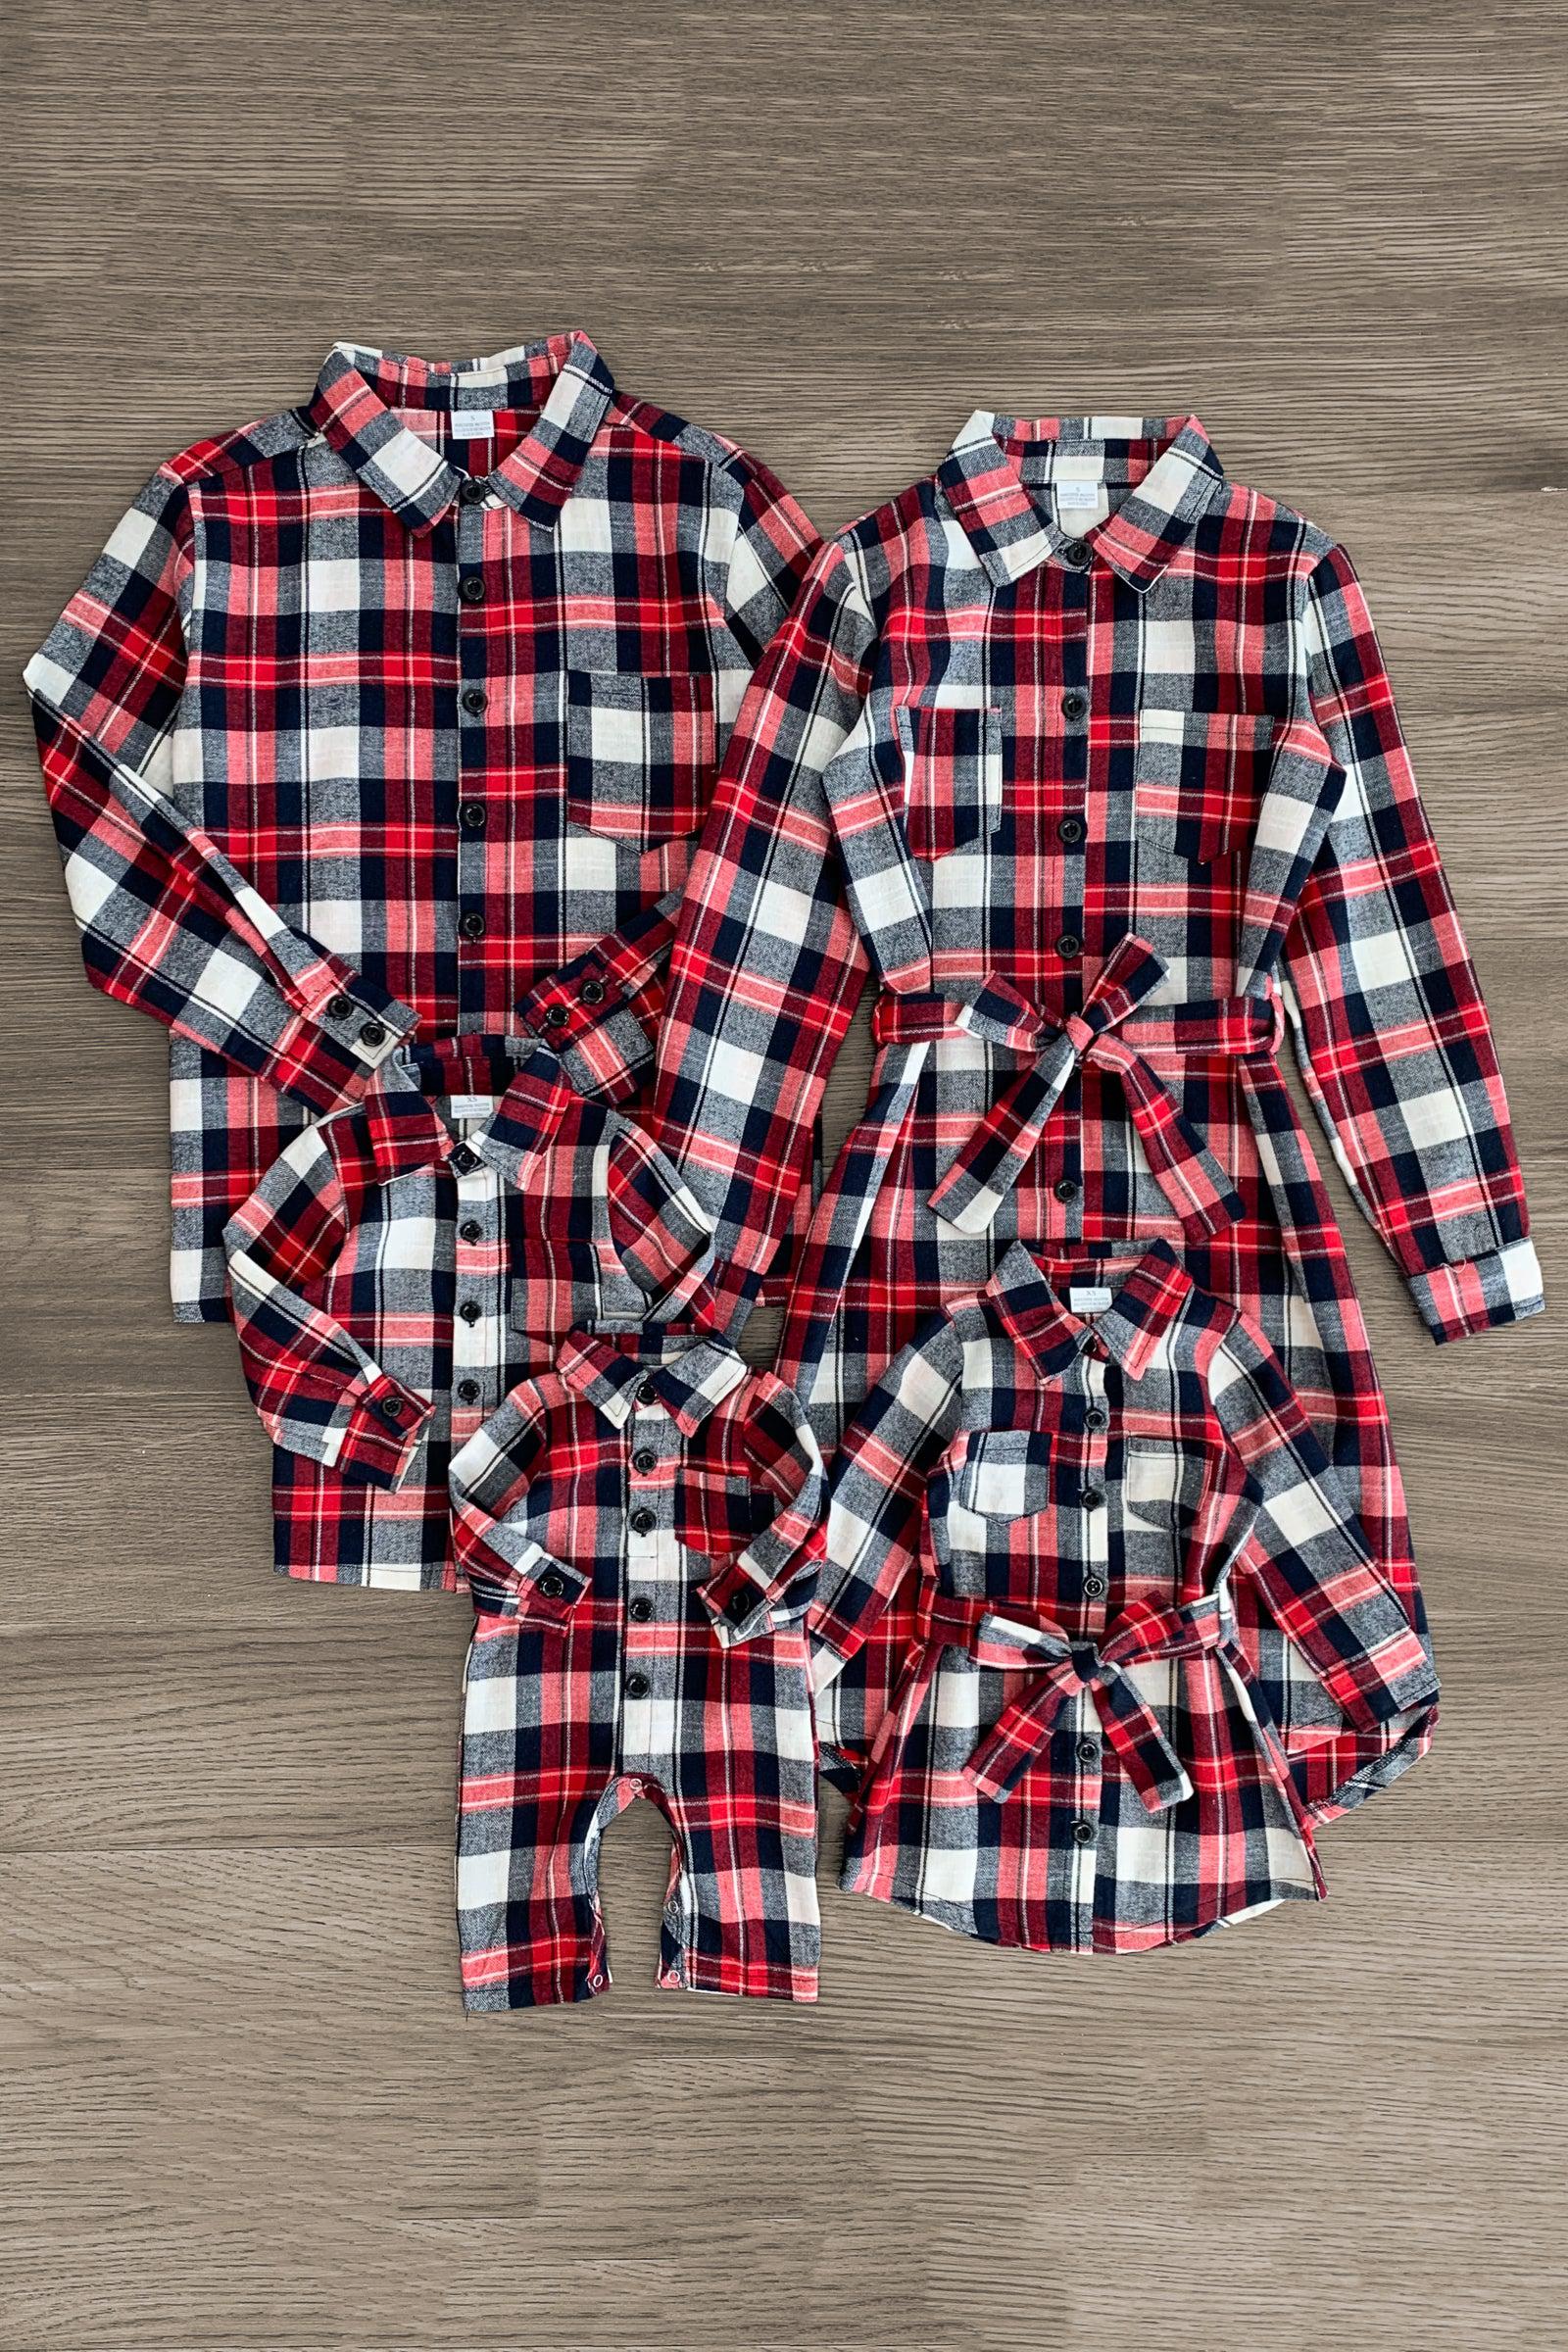 Plaid Family Matching Outfits